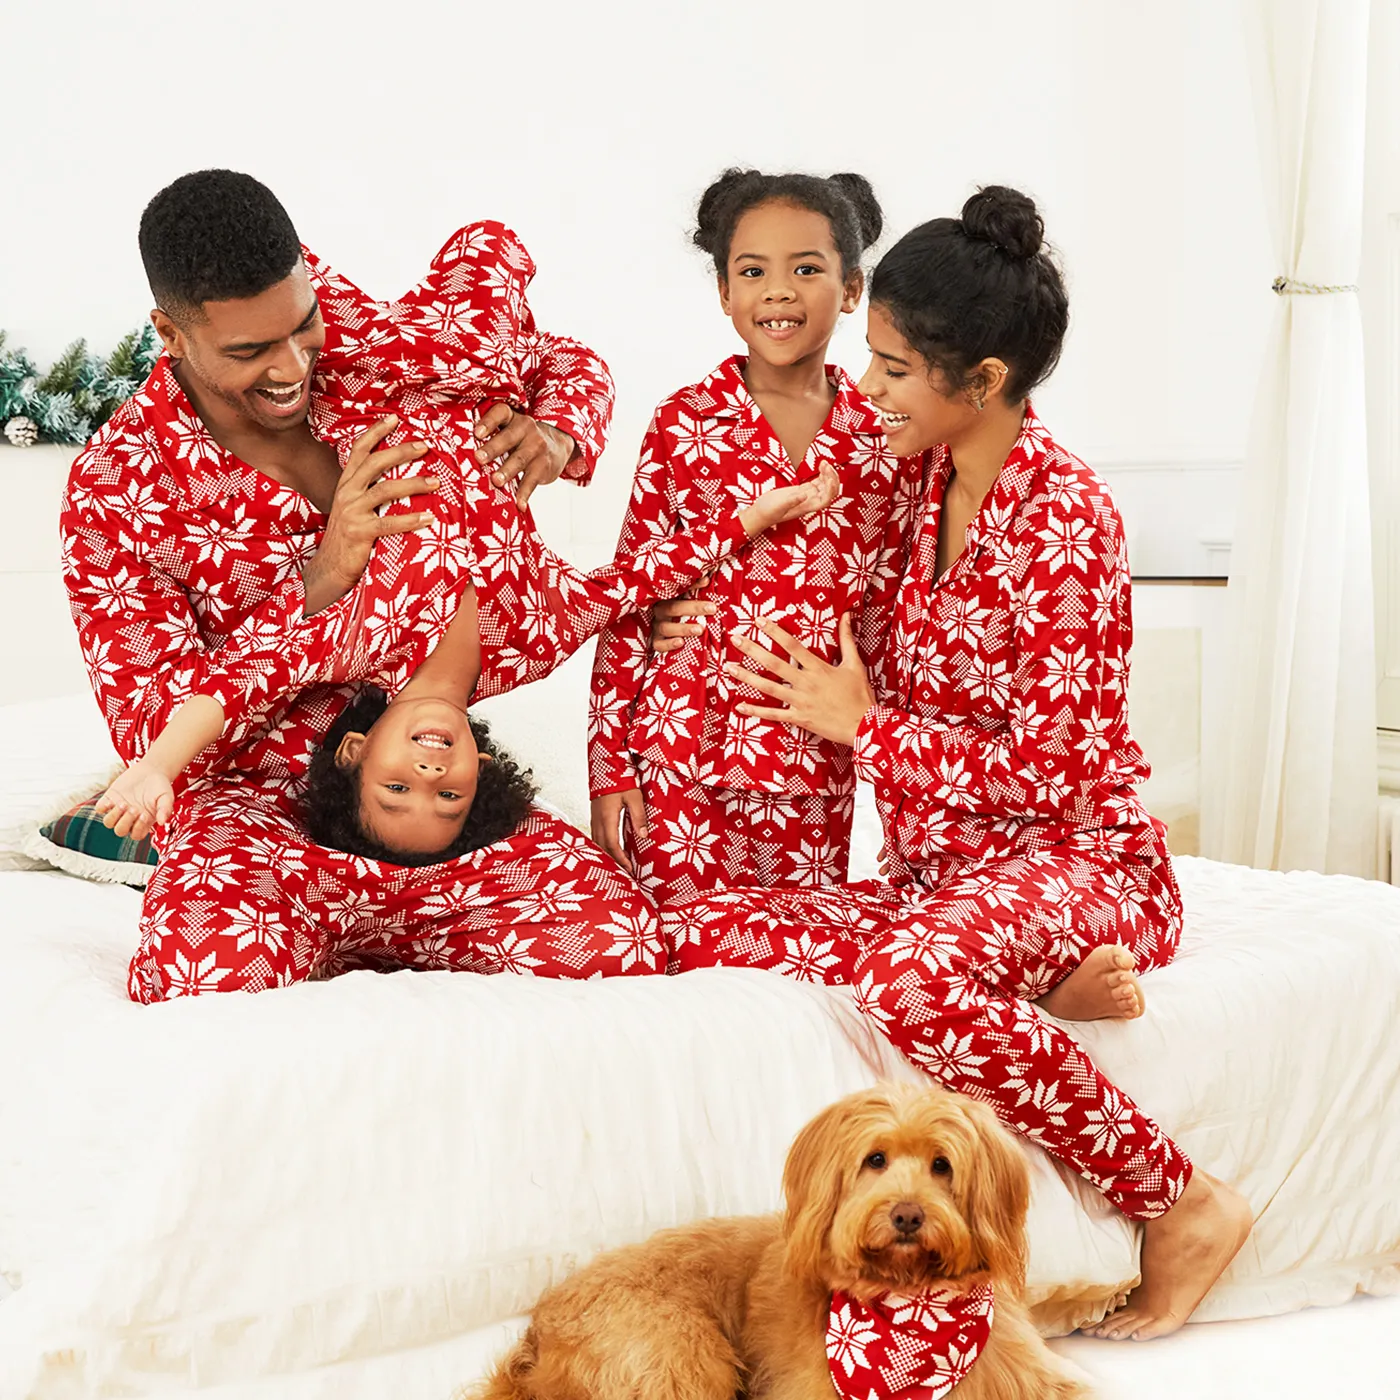 Christmas Snowflake Allover Print Notched Collar Button-down Shirt And Pants Family Matching Pajamas Sets (Flame Resistant)